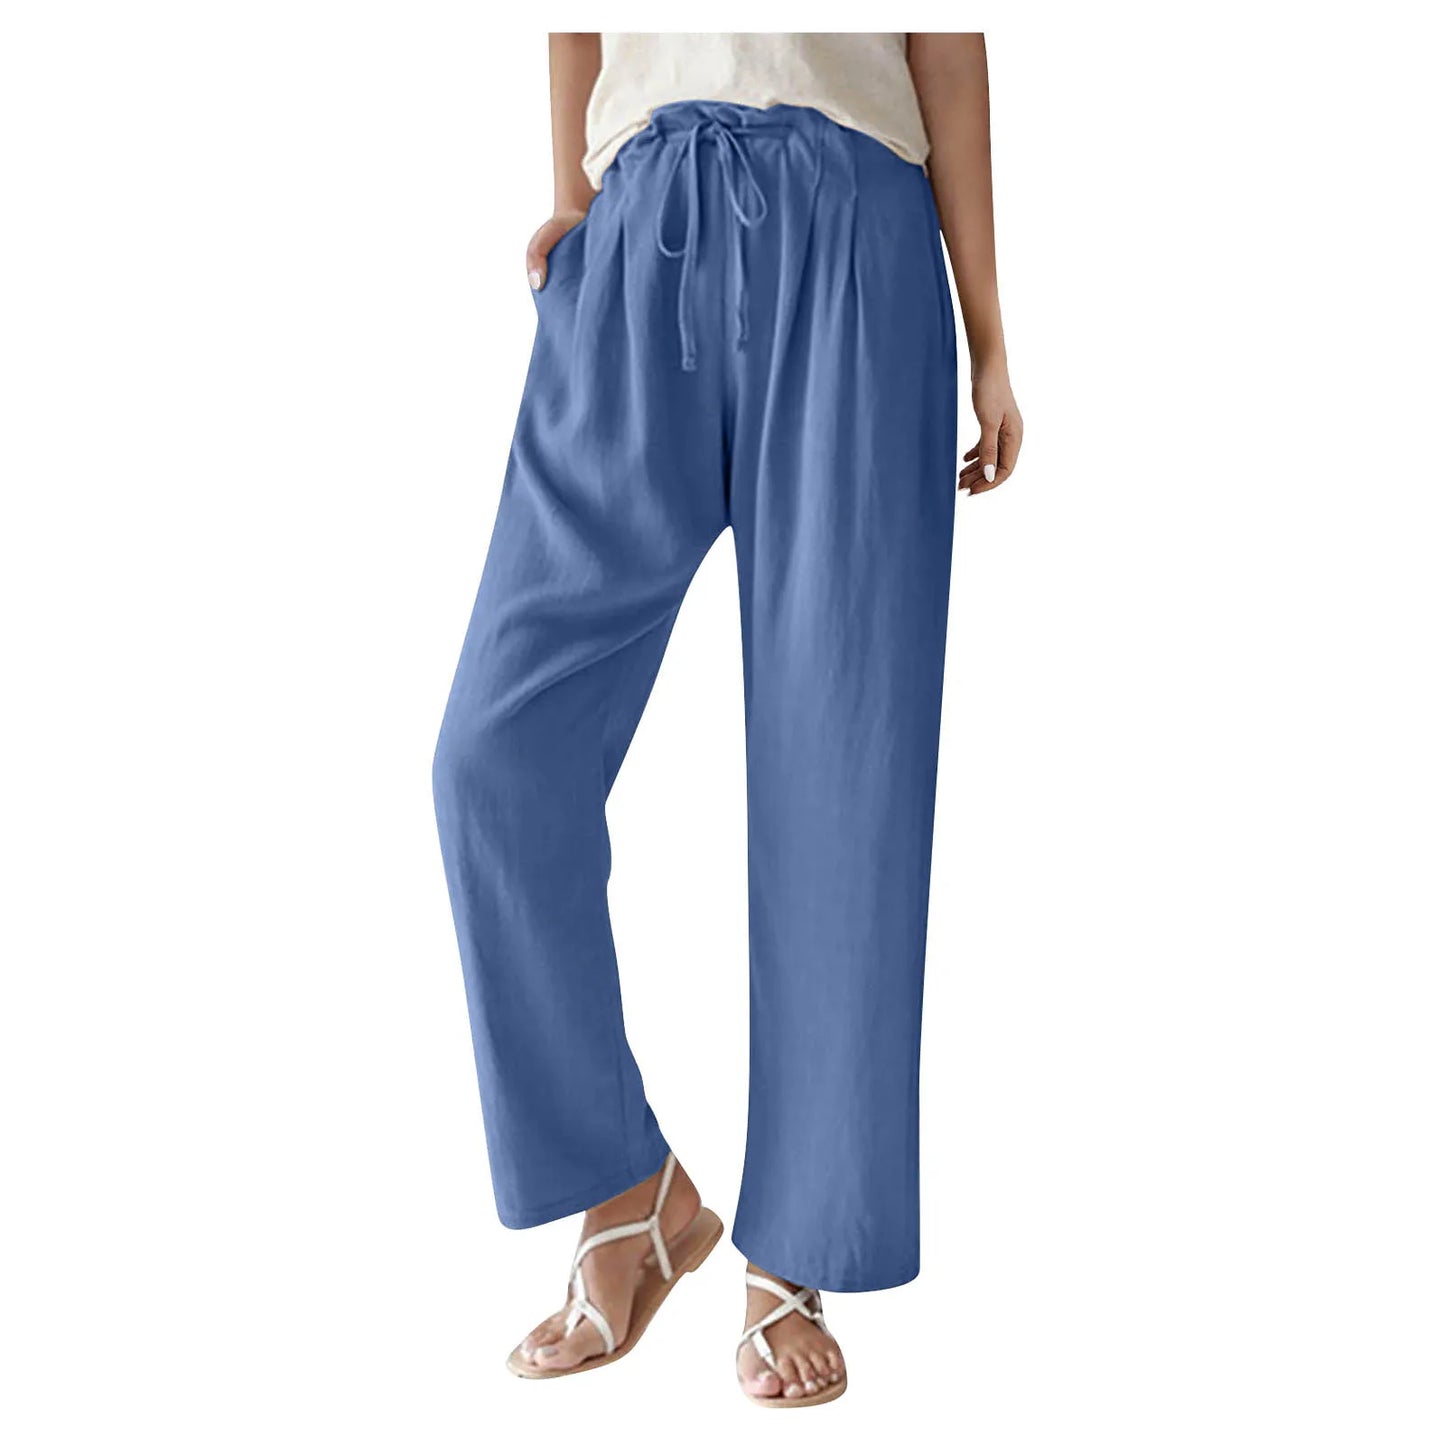 Sunny Days Style: Wide Leg Tie Waist Pants - Your Summer Essential